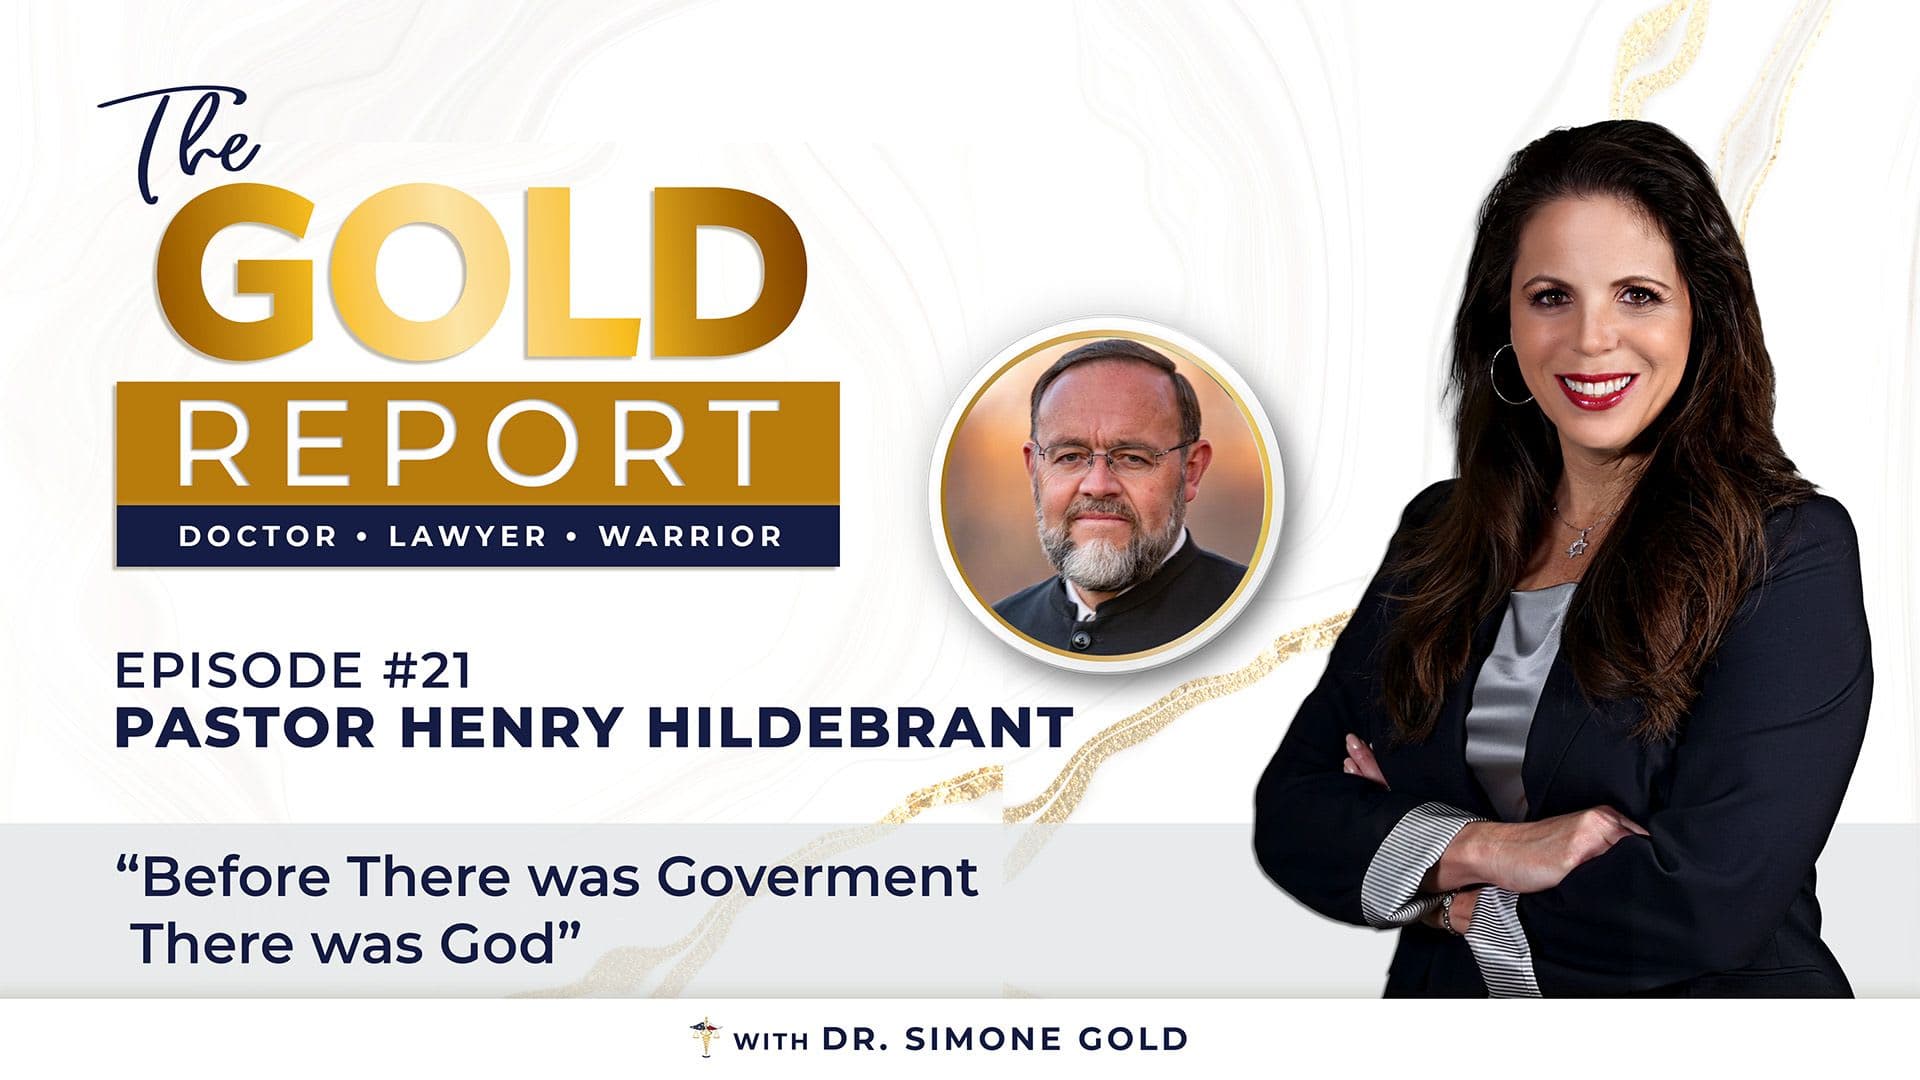 The Gold Report: Ep. 21 'Before There Was Government, There Was God' with Pastor Henry Hildebrandt